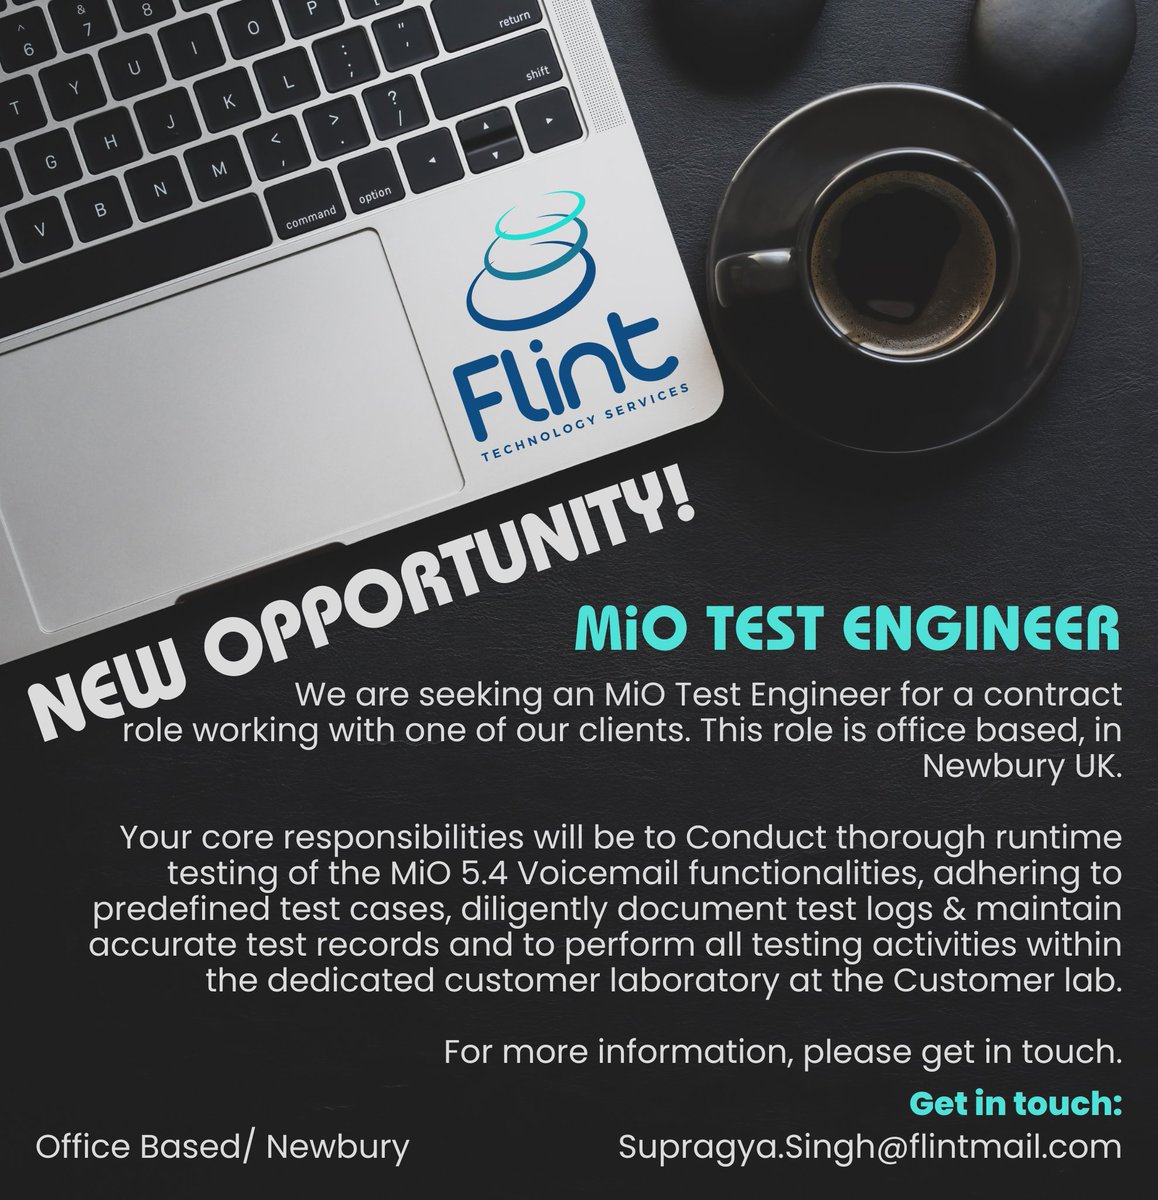 #TeamFTS are seeking an MiO Test Engineer for an office-based, contract role working with one of our clients.

To apply for this role, or for more information, please get in touch.

#MiO #TestEngineer #EngineeringJobs #NewOpportunity #JobAlert #TelcoJobs #ContractJobs